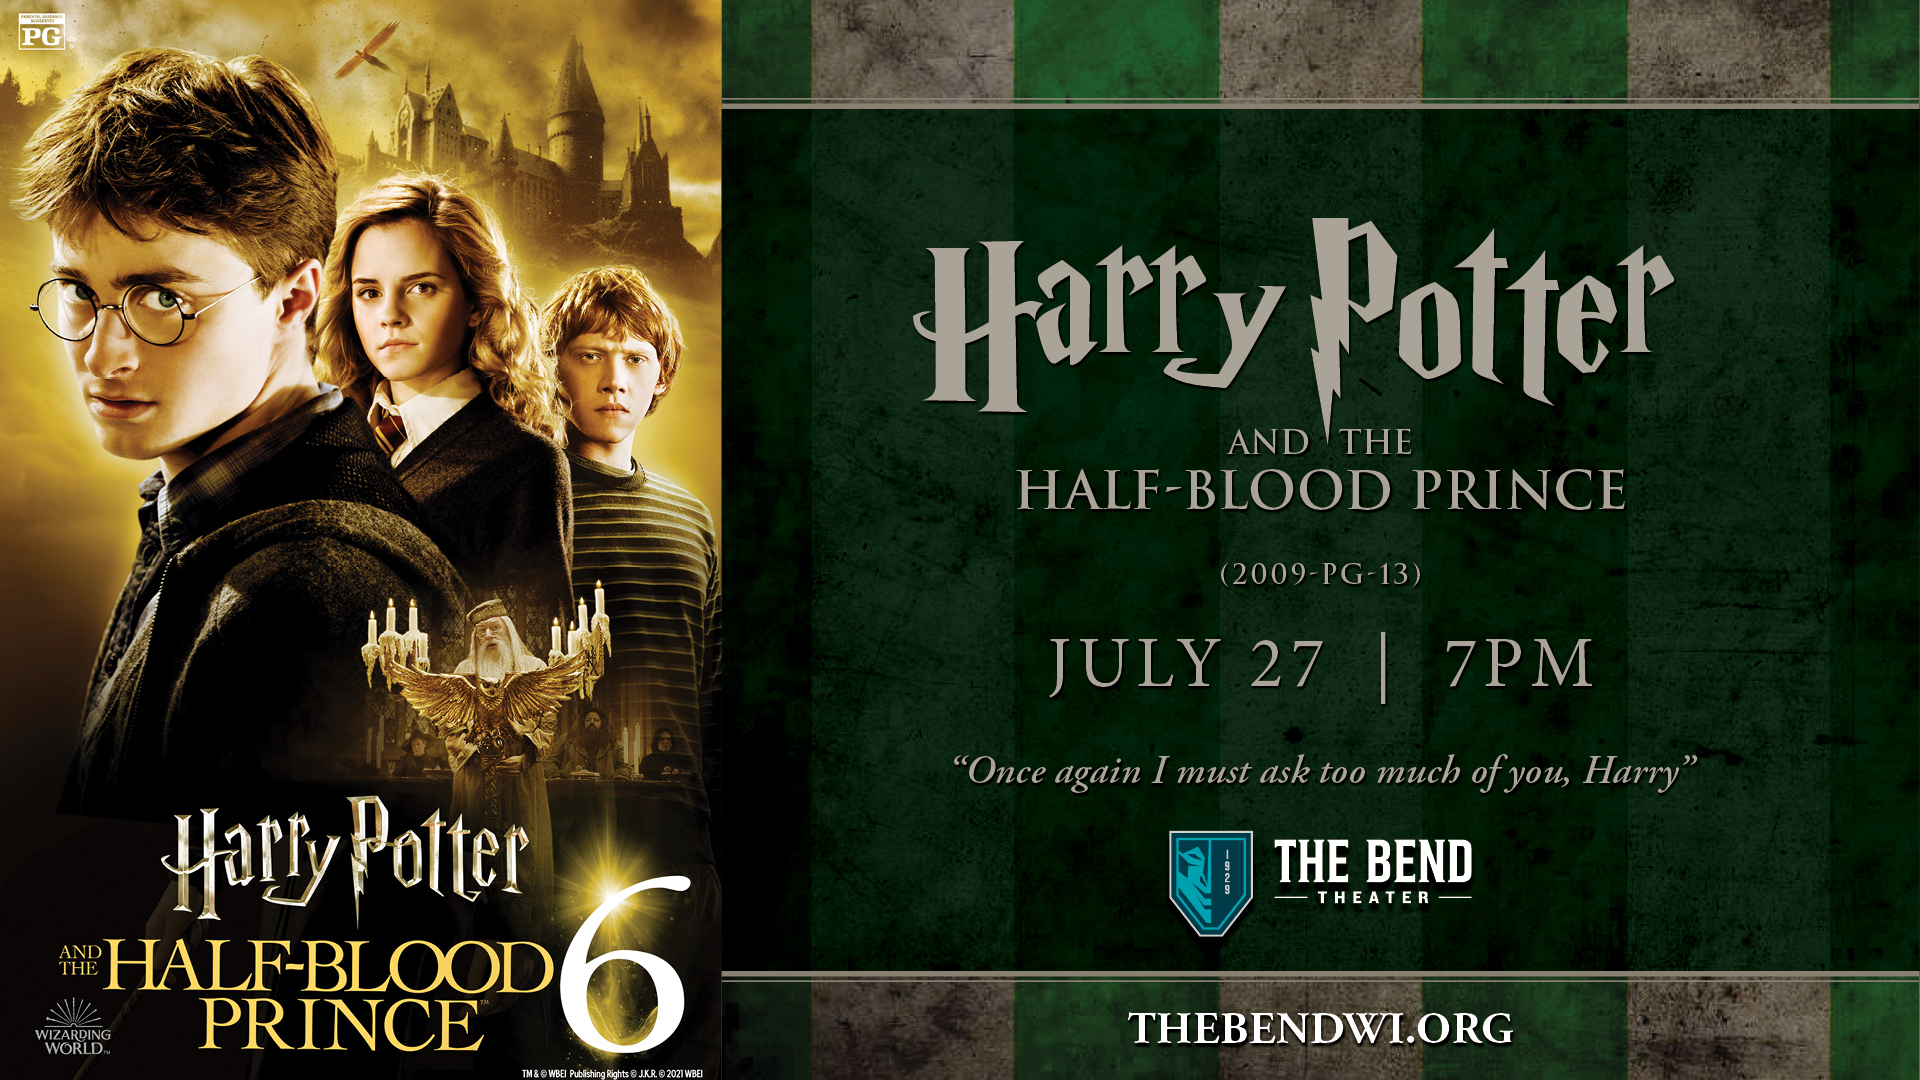 Wizarding World Nights at The Bend Theater: Harry Potter and The Half-Blood Prince (2009 - PG)